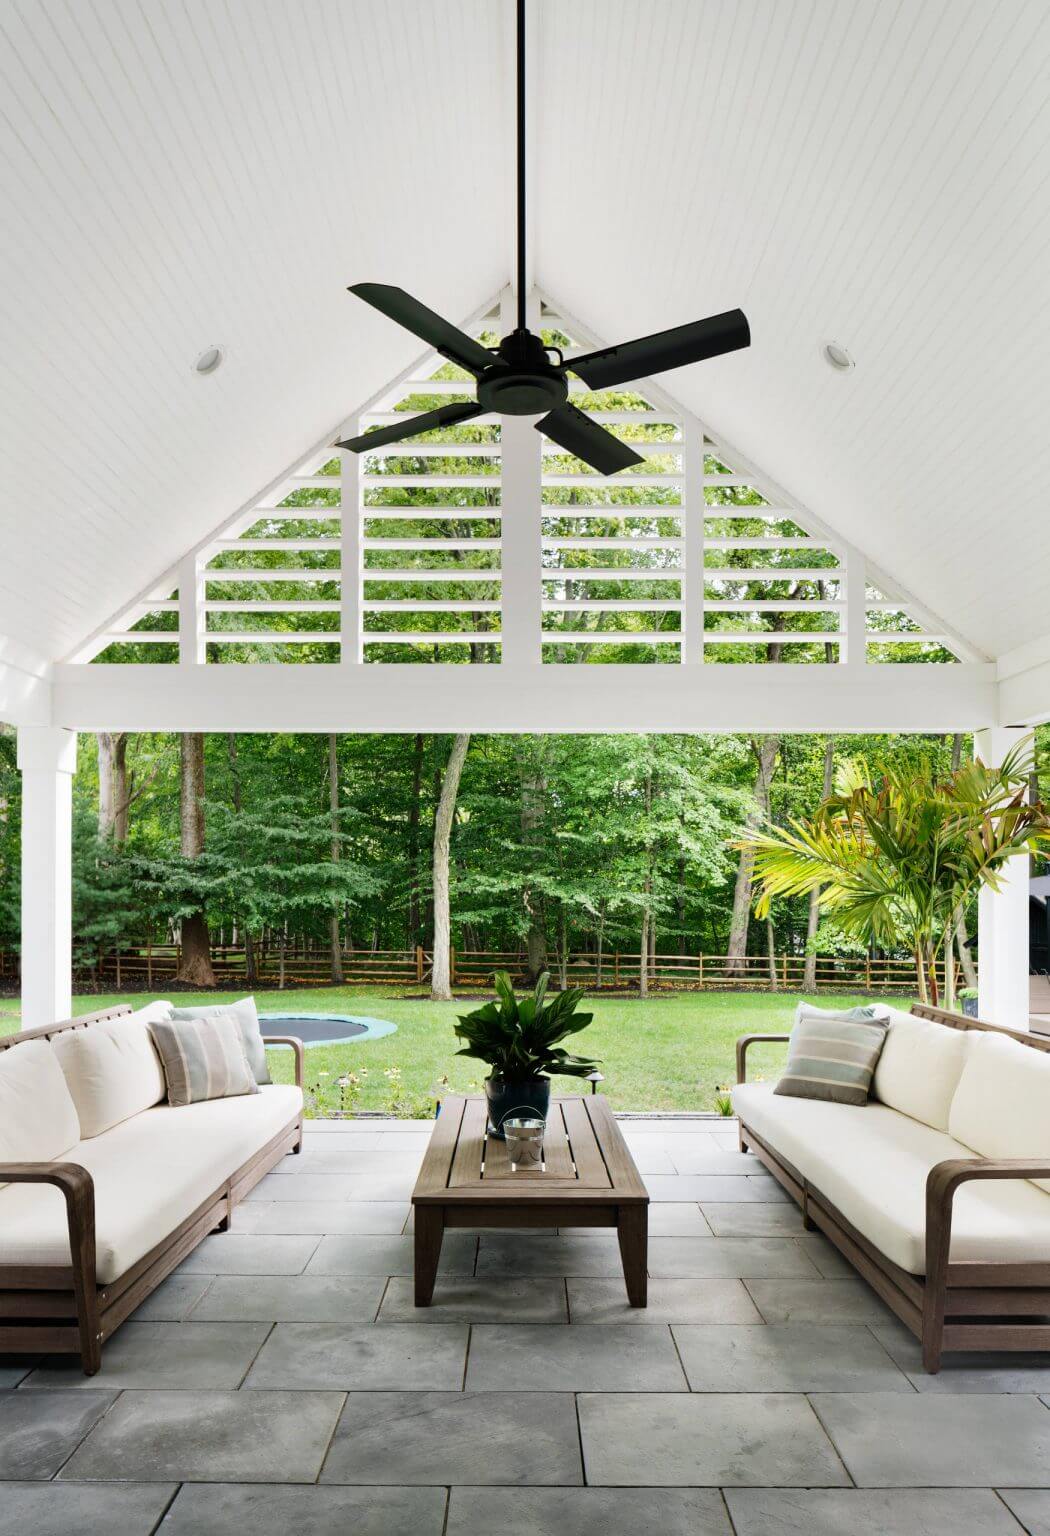 A modern outdoor patio with a vaulted ceiling, ceiling fan, and lush greenery surrounding it.